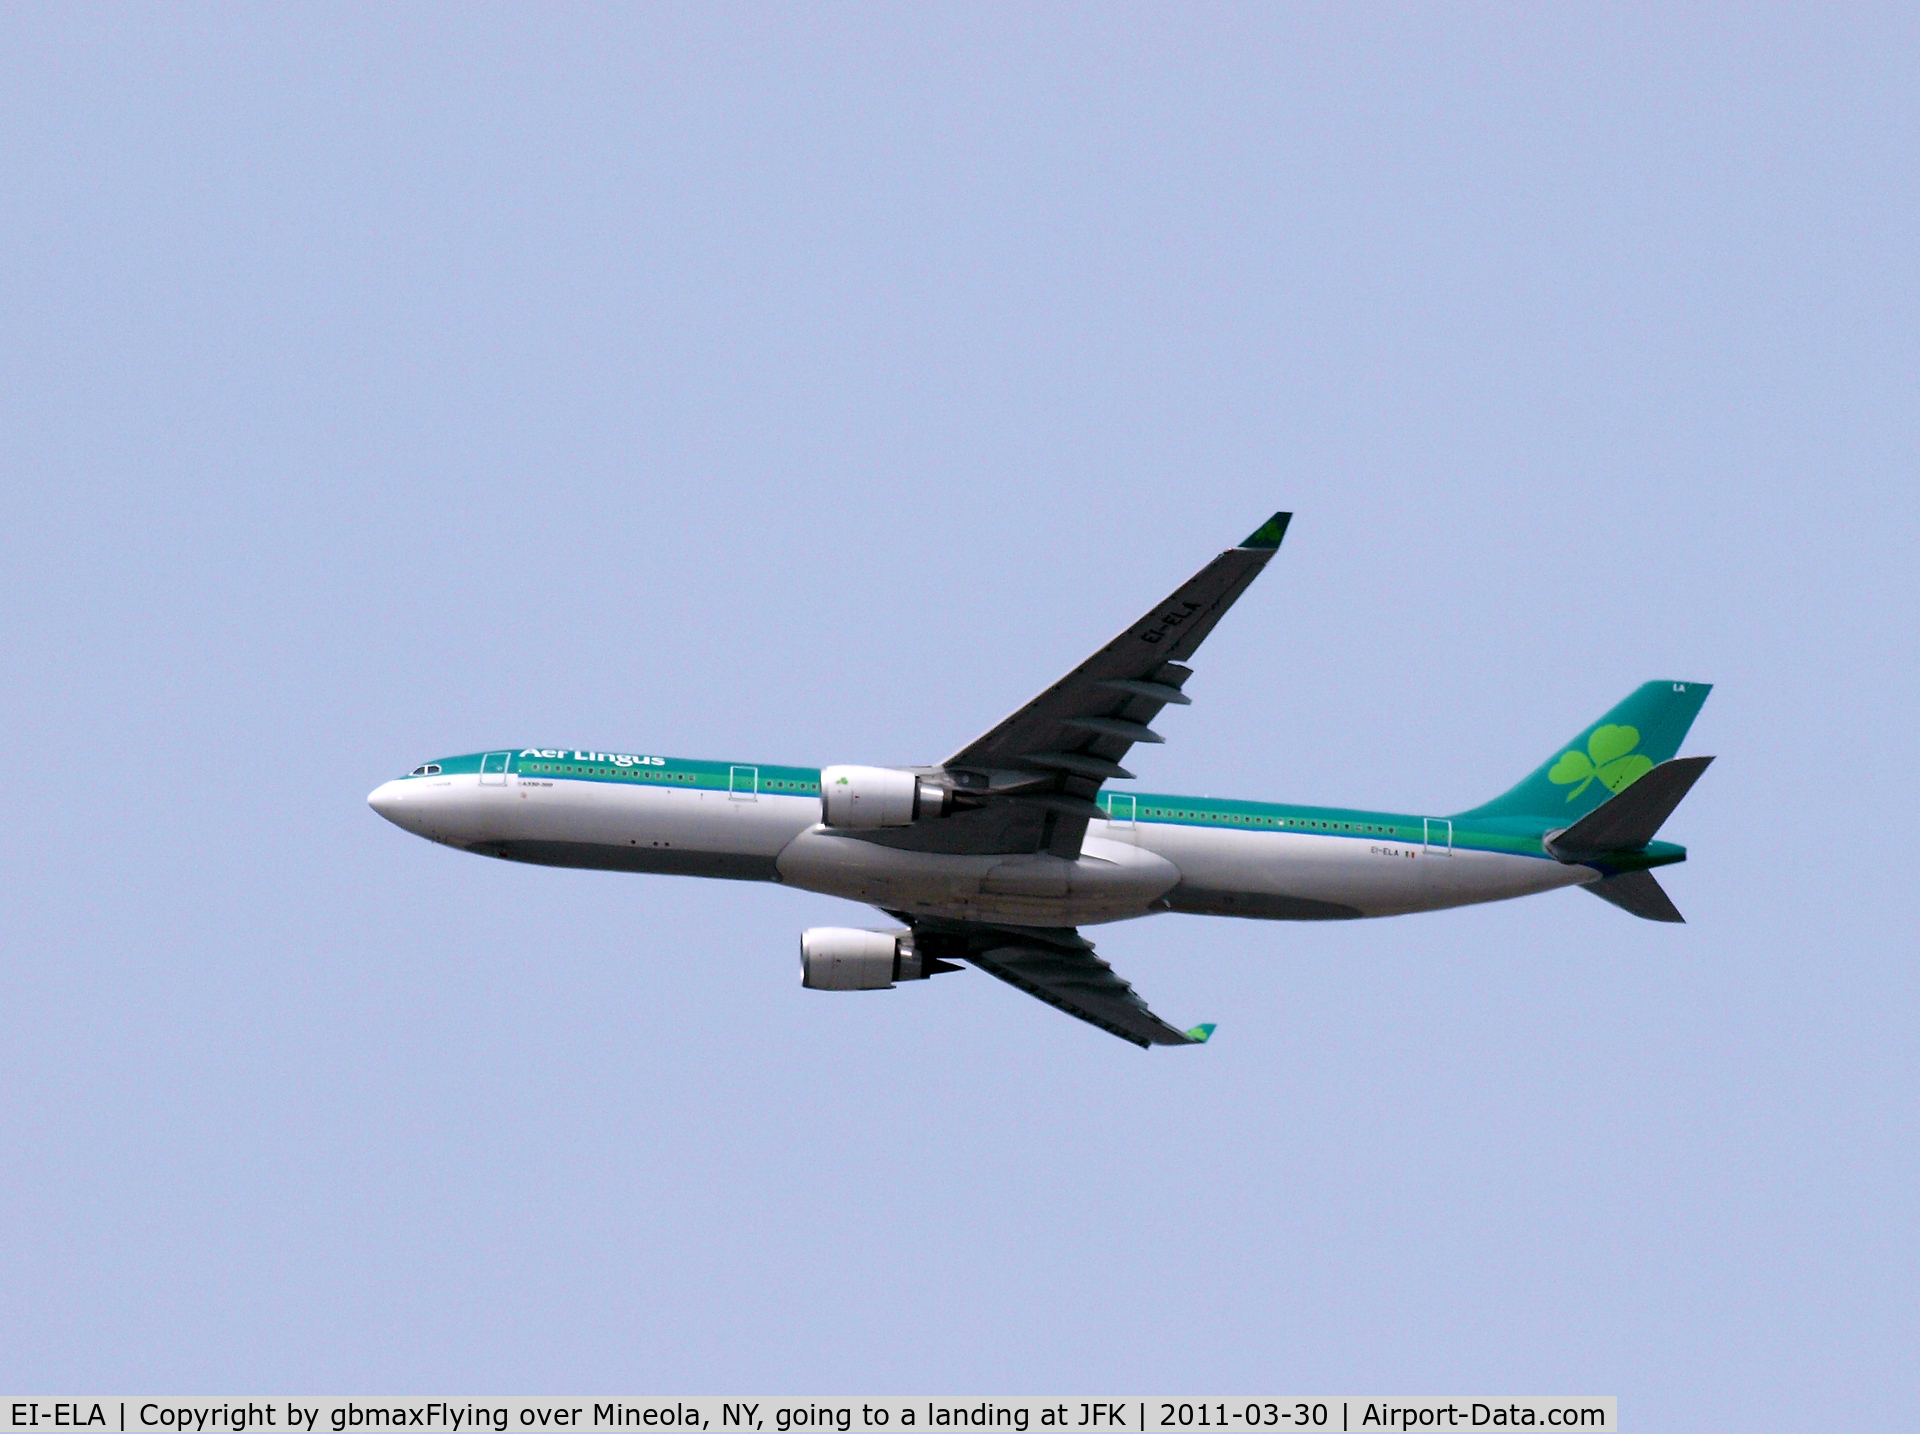 EI-ELA, 2010 Airbus A330-302X C/N 1106, Flying over Mineola, NY, going to a landing at JFK